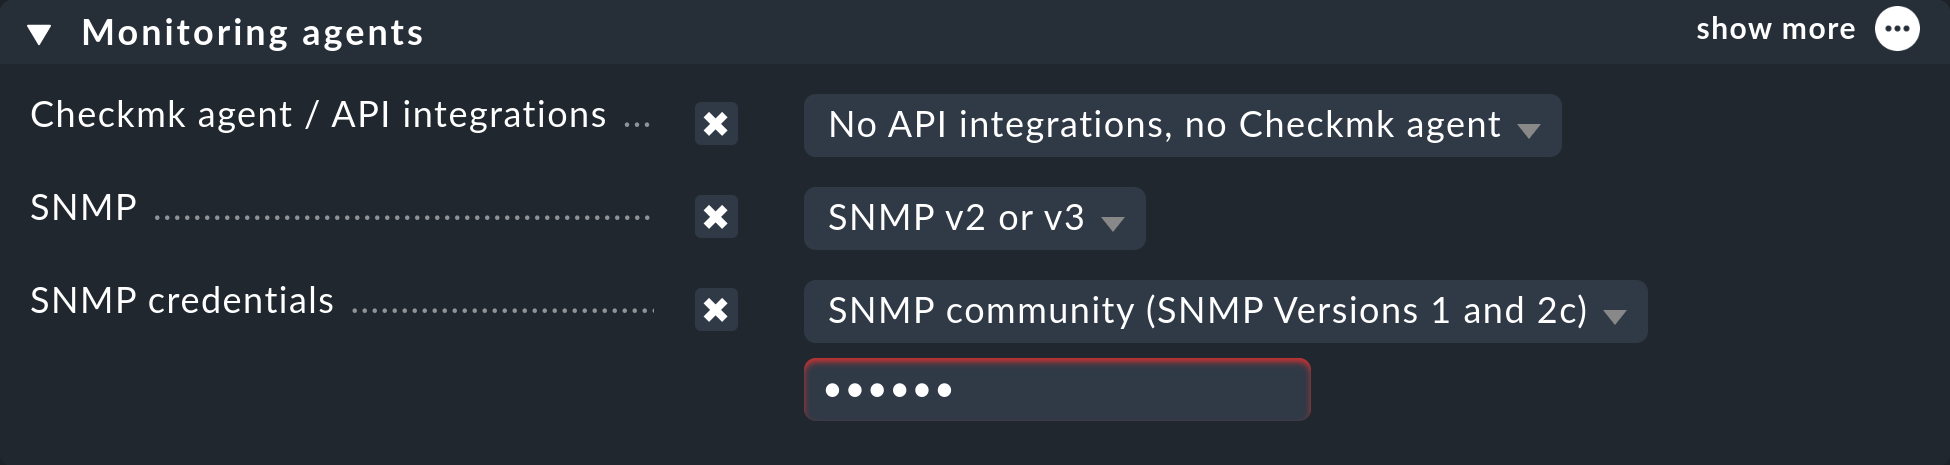 Dialog with properties when creating a host via SNMP: the 'Monitoring agents'.